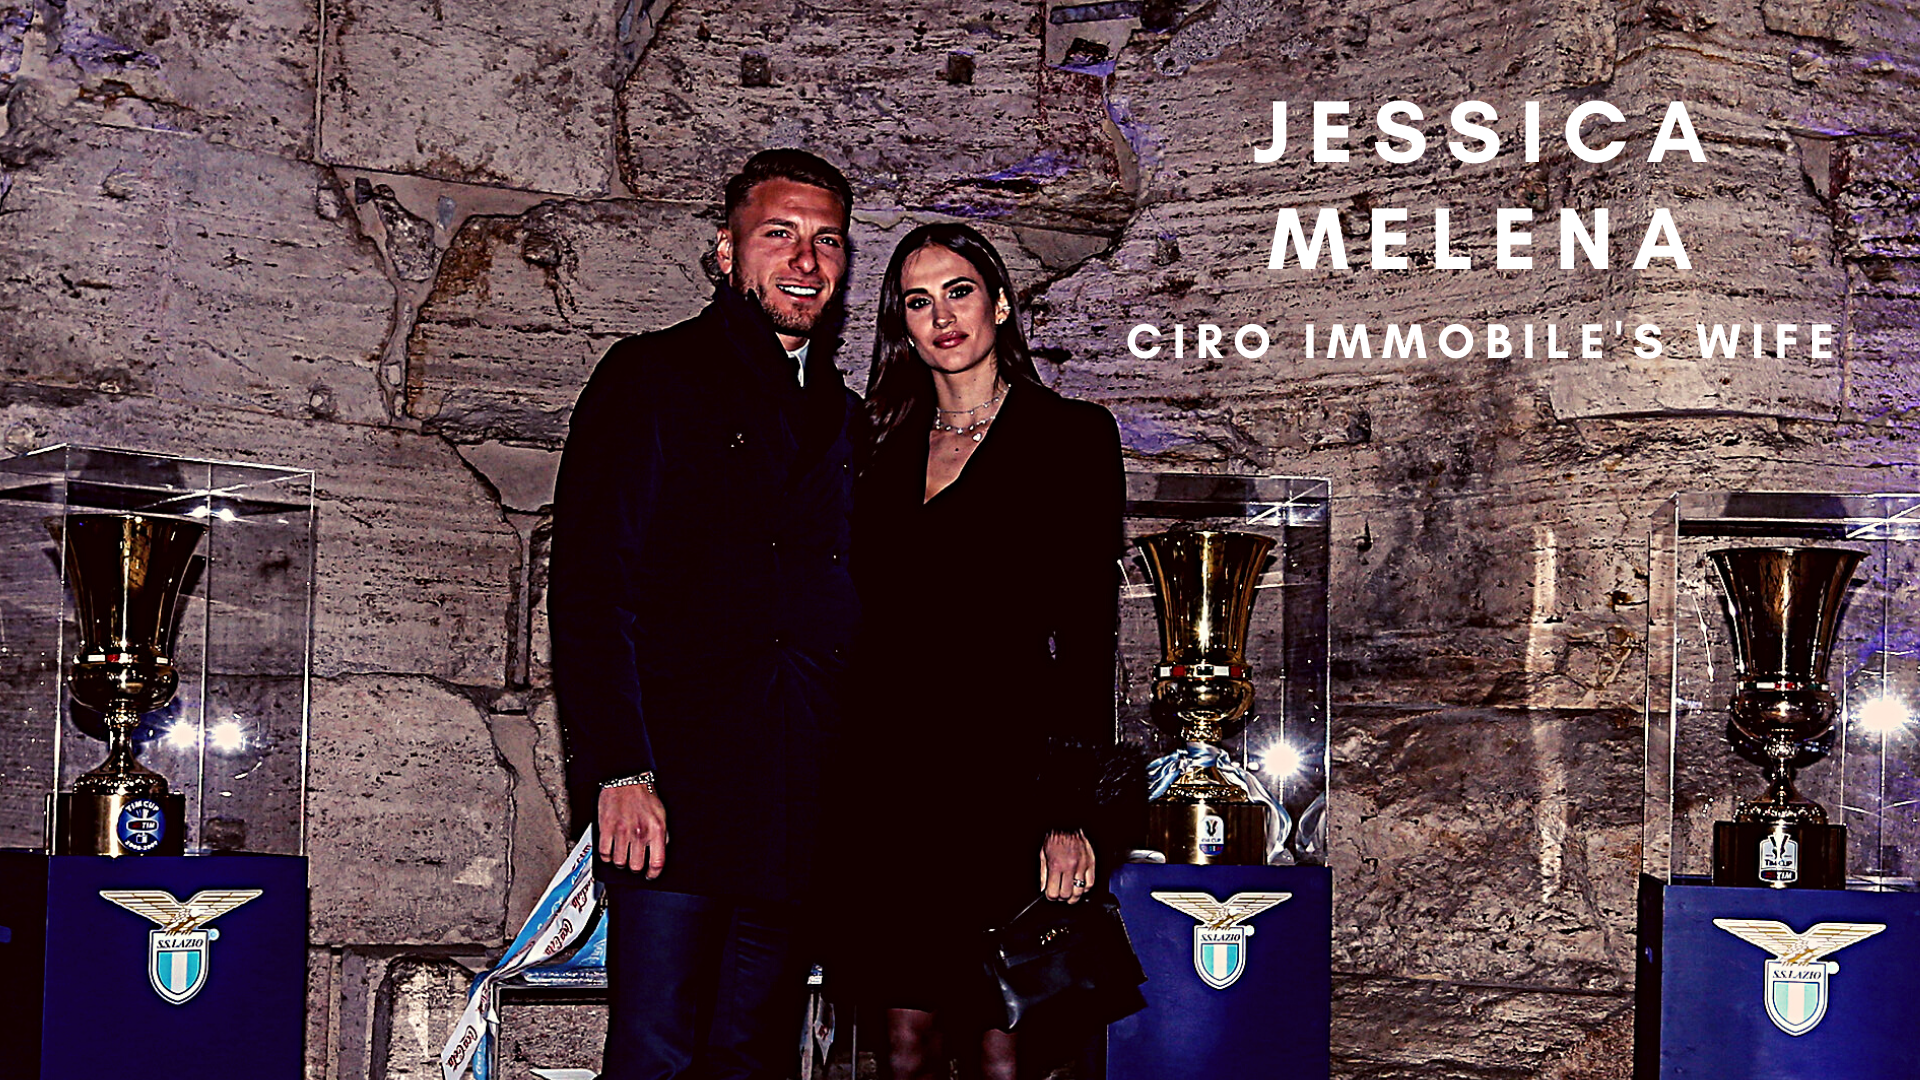 Who Is Jessica Melena? Meet The Wife Of Ciro Immobile. (Original Photo by Paolo Bruno/Getty Images)